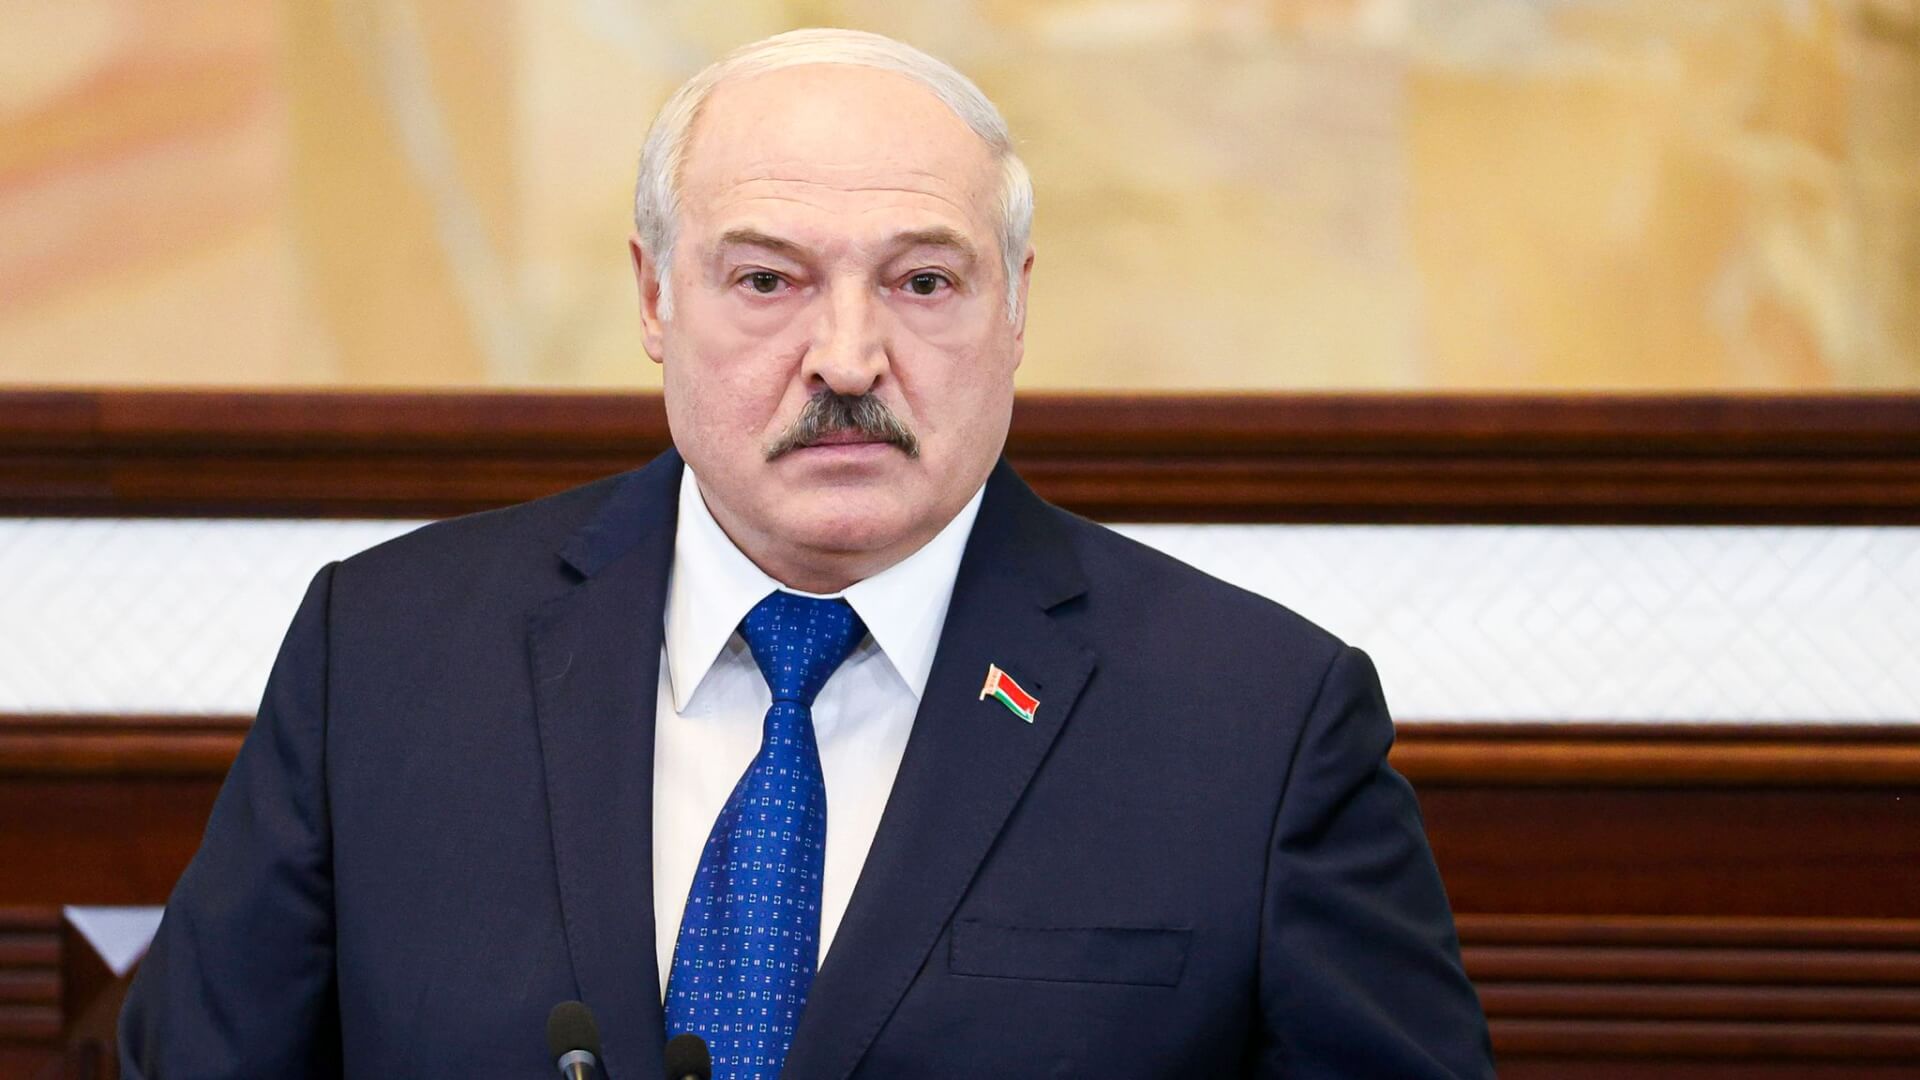 Belarus Pres. Lukashenko Defends Russia’s Invasion of Ukraine but Says It Has “Dragged On”